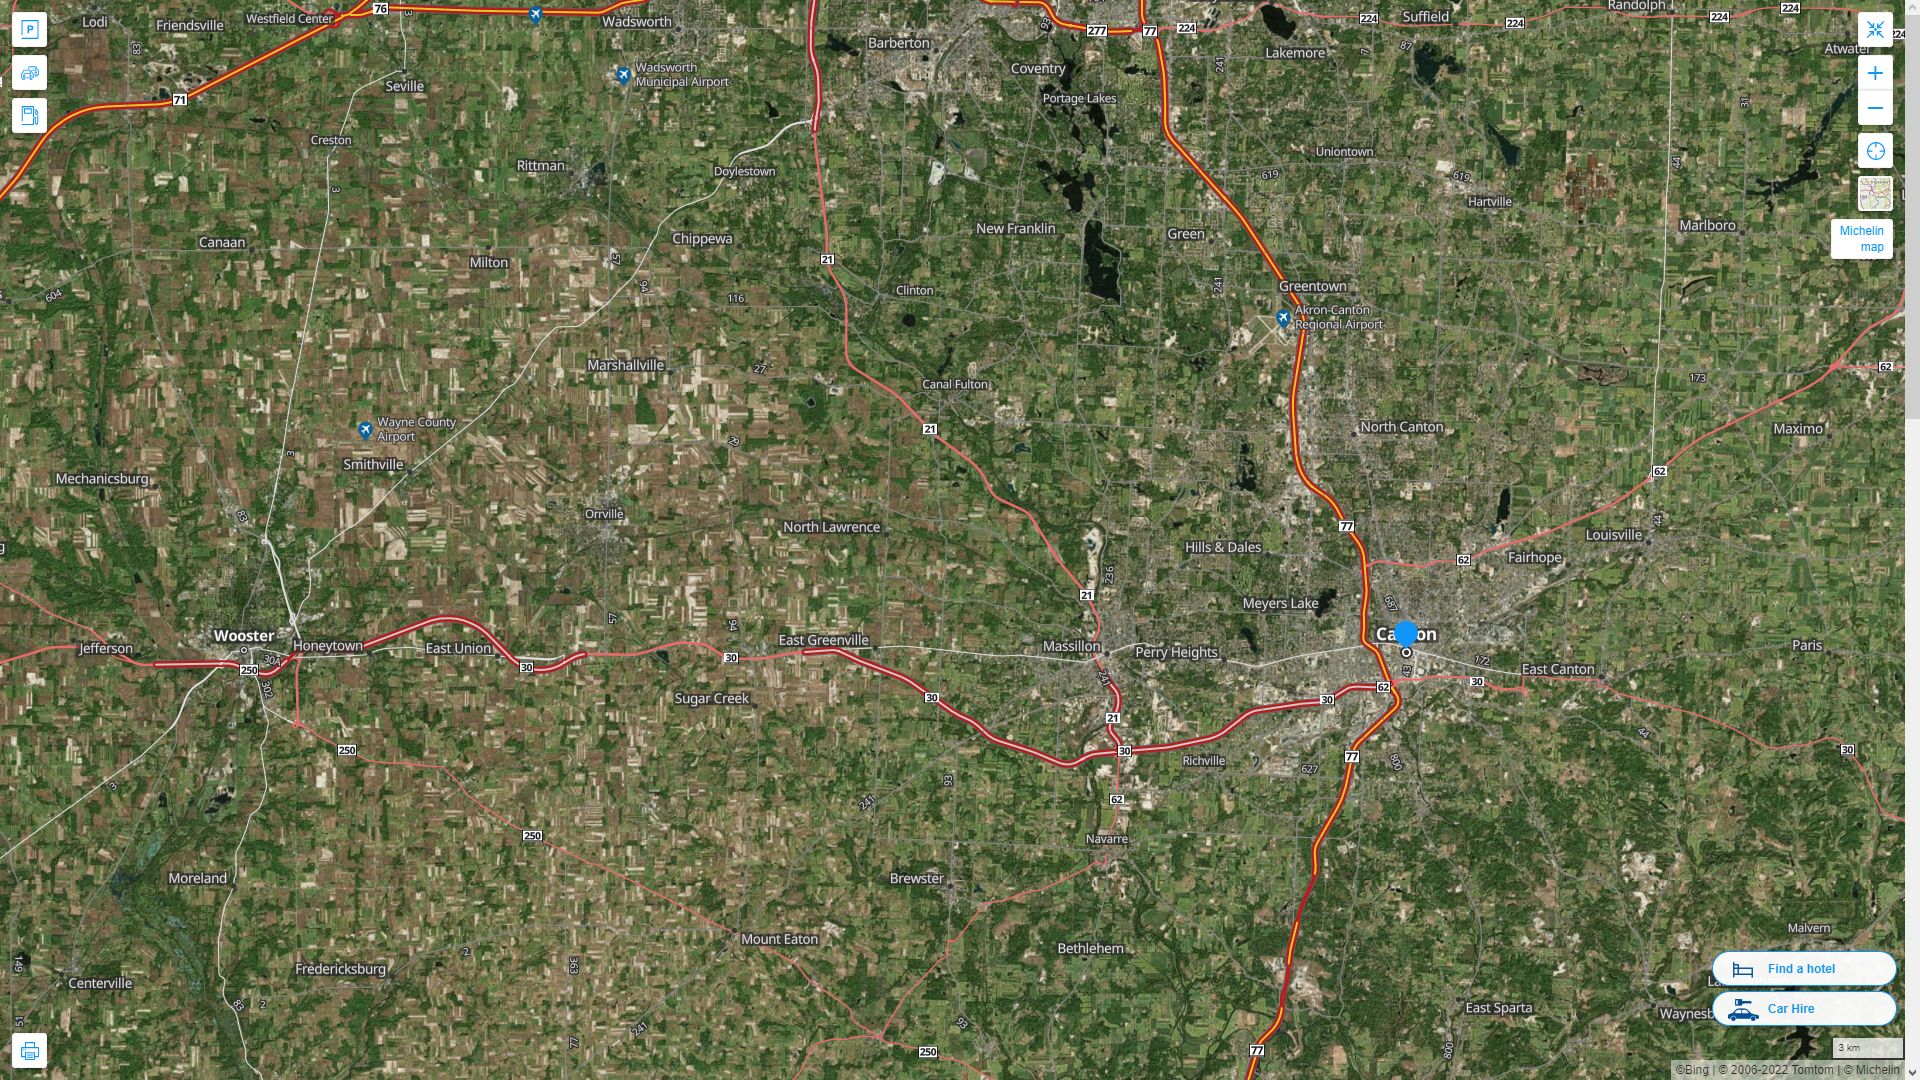 Canton Ohio Highway and Road Map with Satellite View